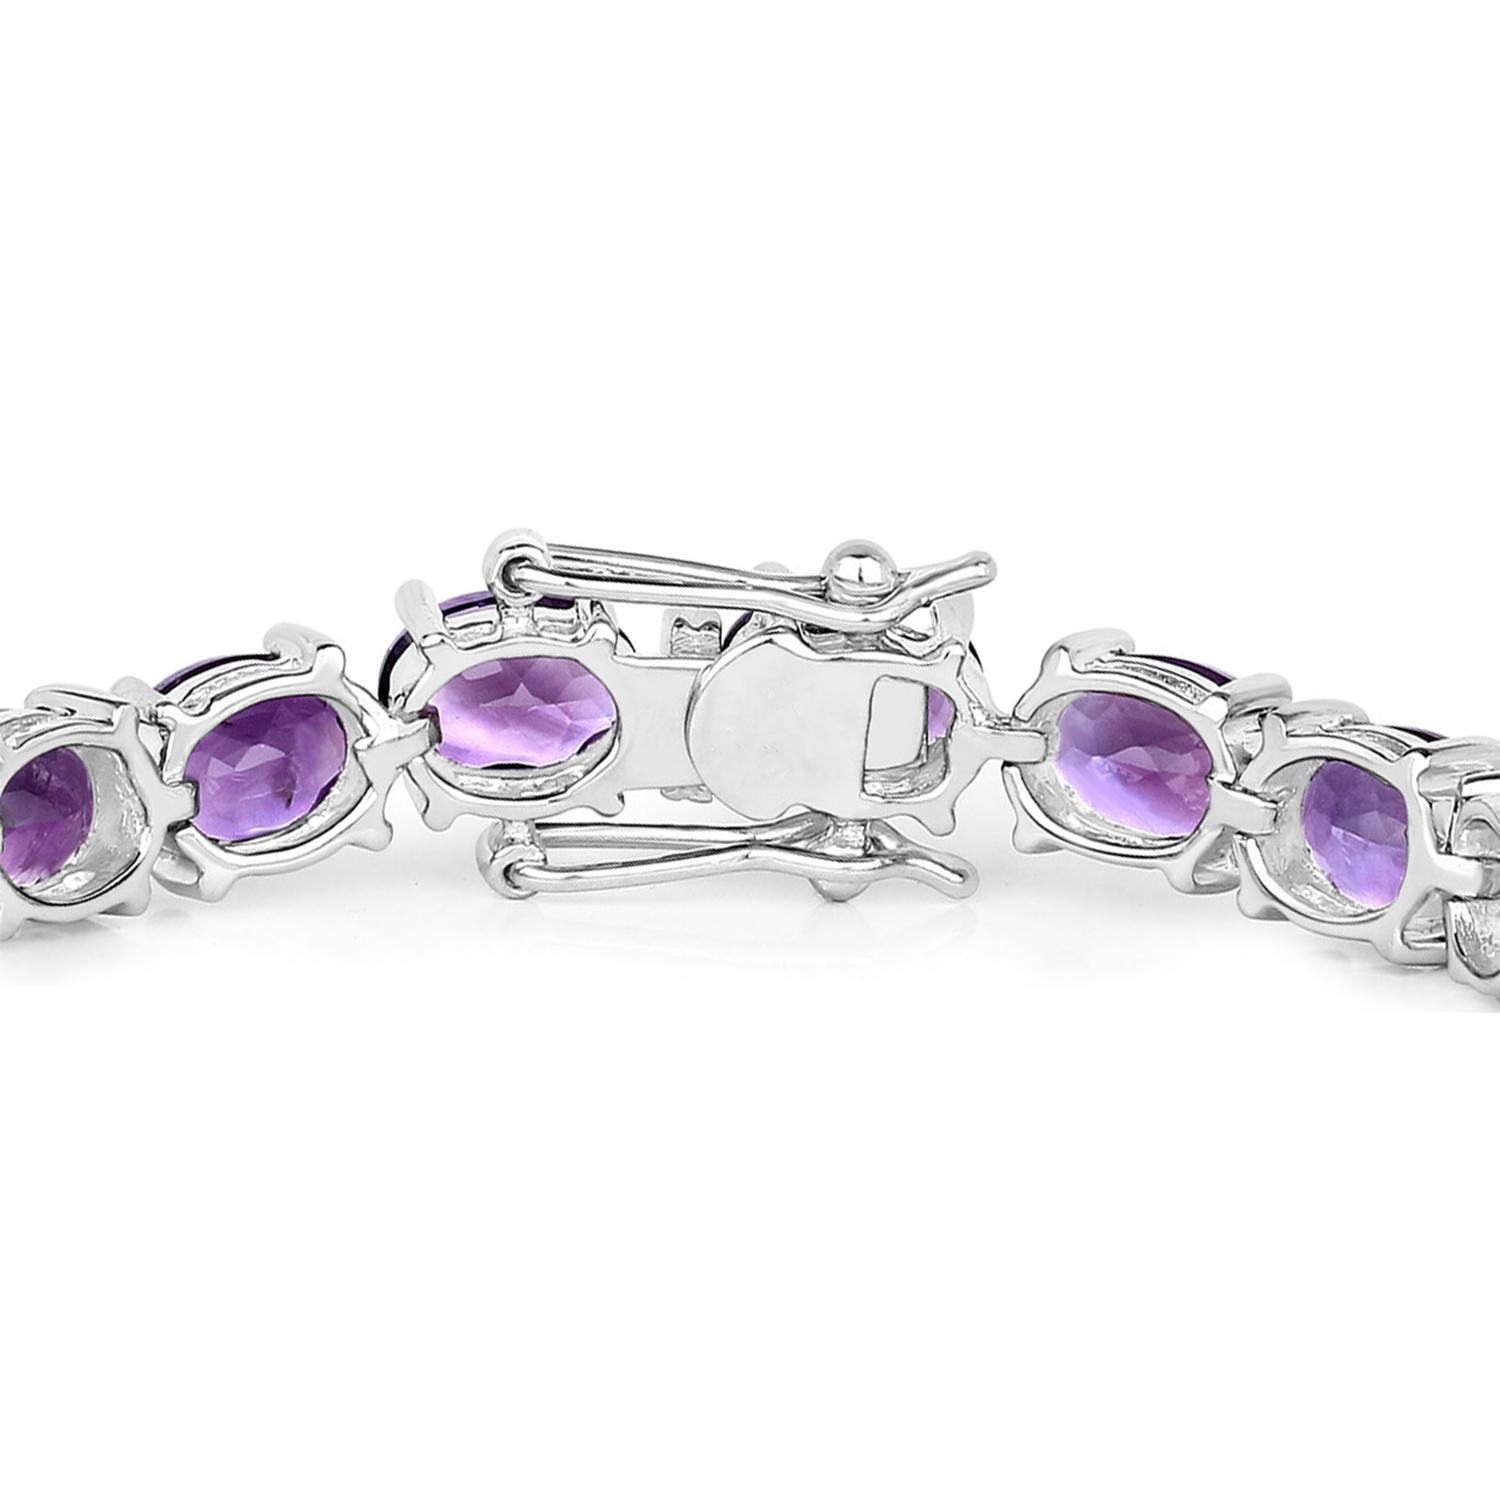 Amethyst Tennis Bracelet 23.10 Carats Rhodium Plated Sterling Silver In Excellent Condition For Sale In Laguna Niguel, CA